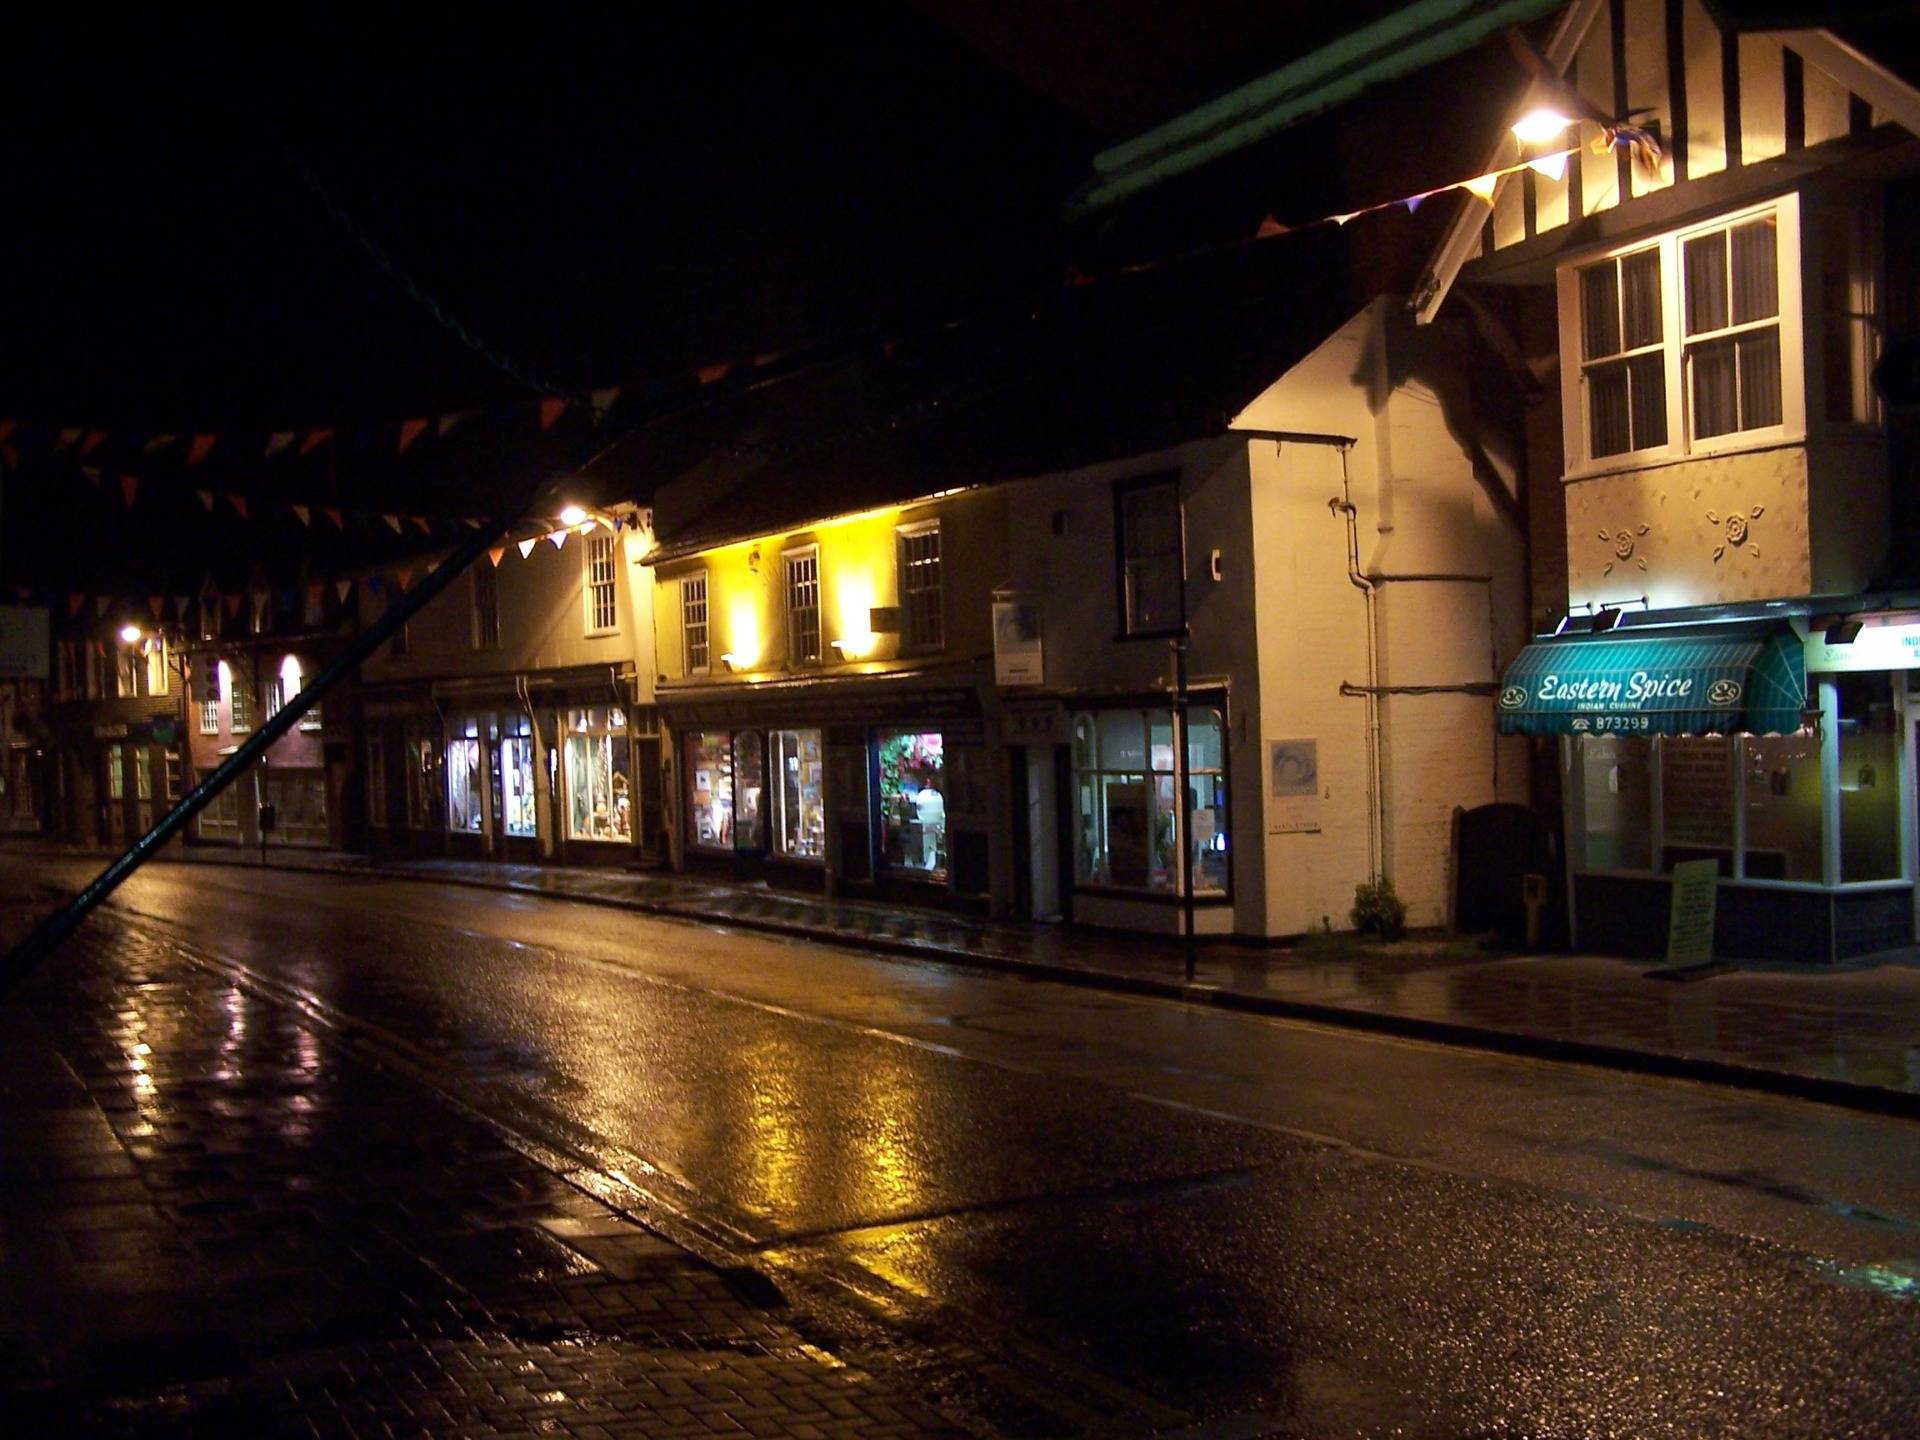 The High Street - Night Time